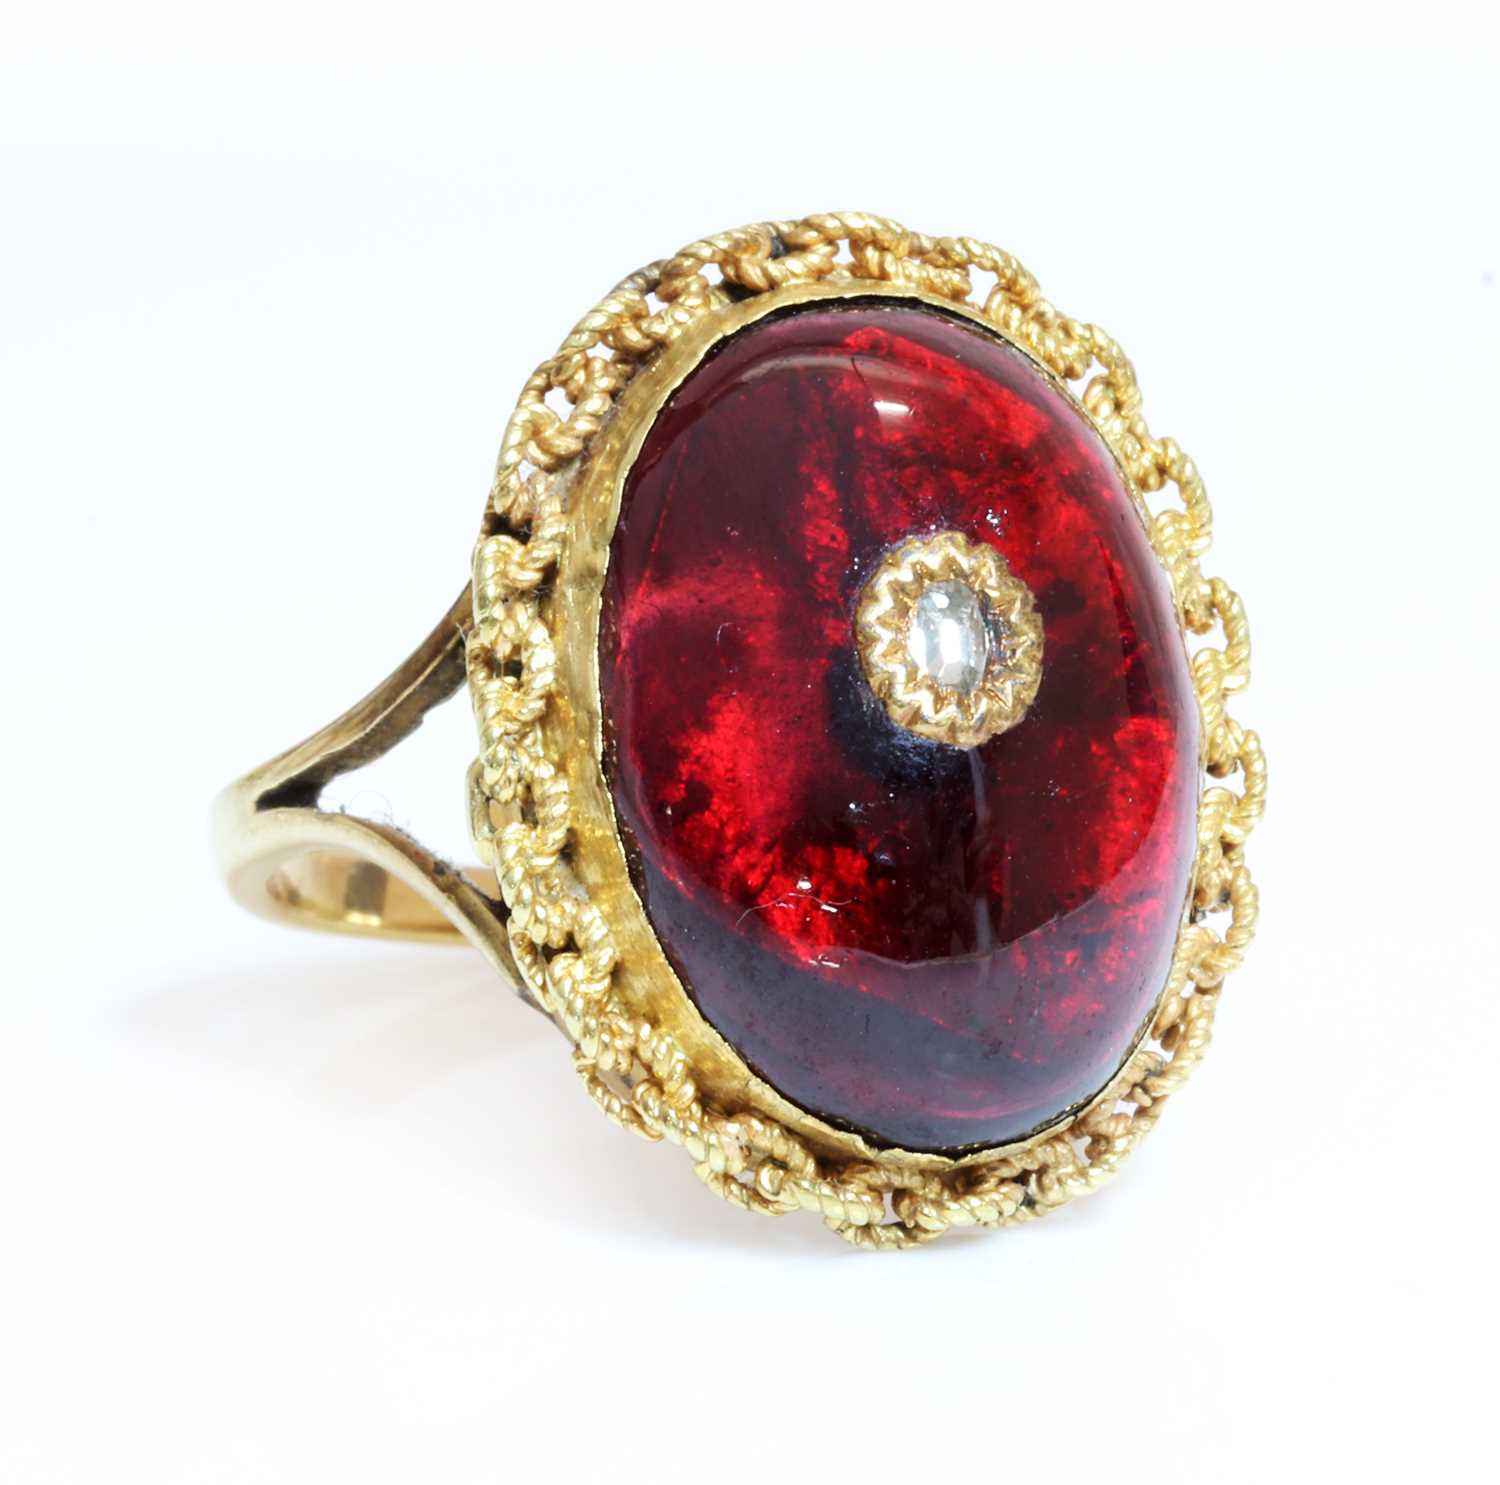 Lot 60 - A Victorian cabochon garnet and diamond later mounted as a ring